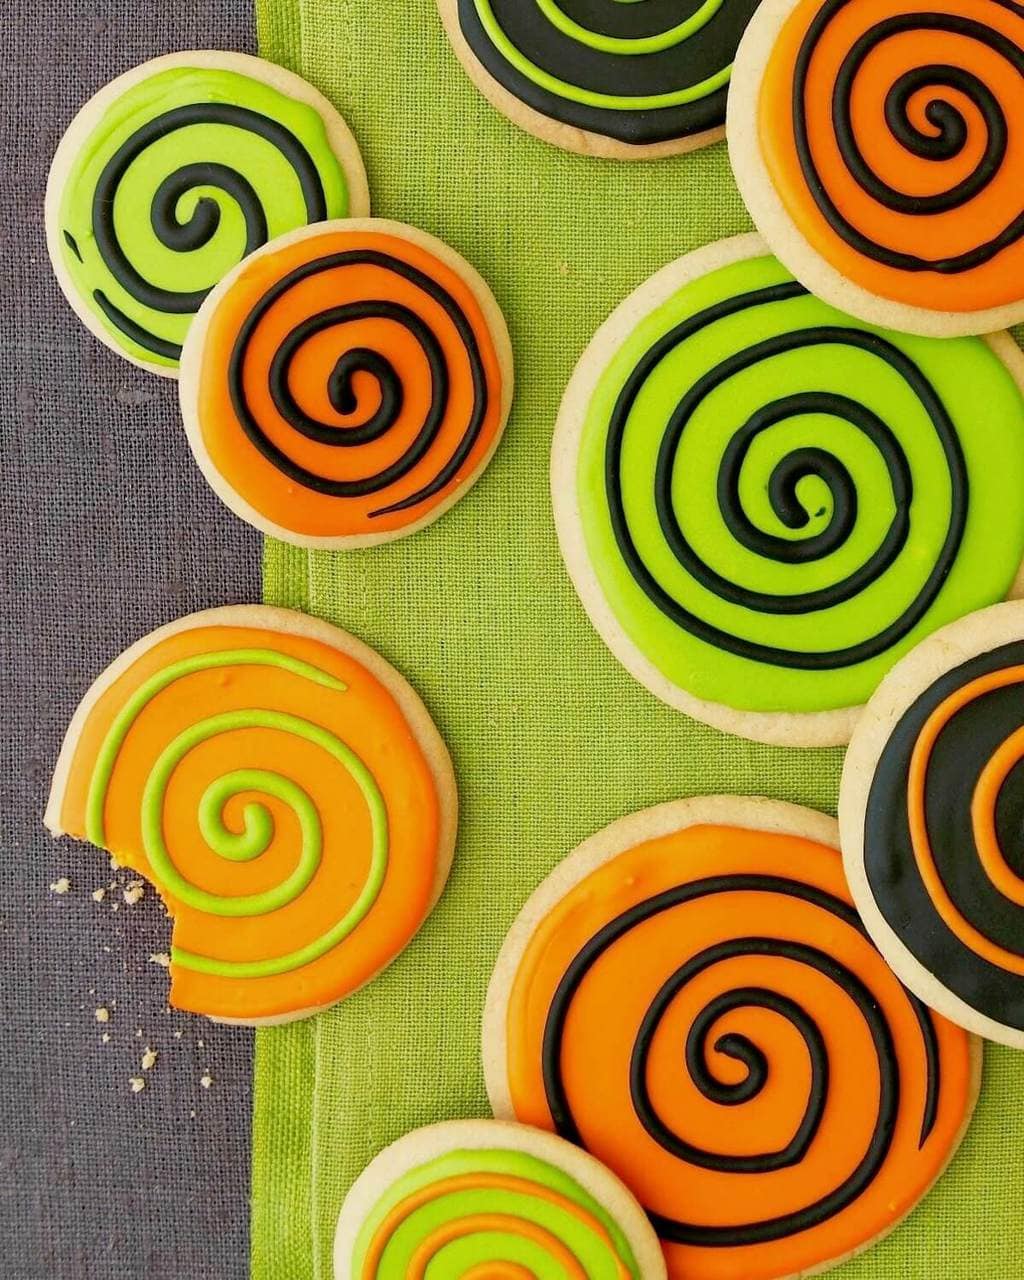 Spooky spiral halloween cookies with orange green and black frosting